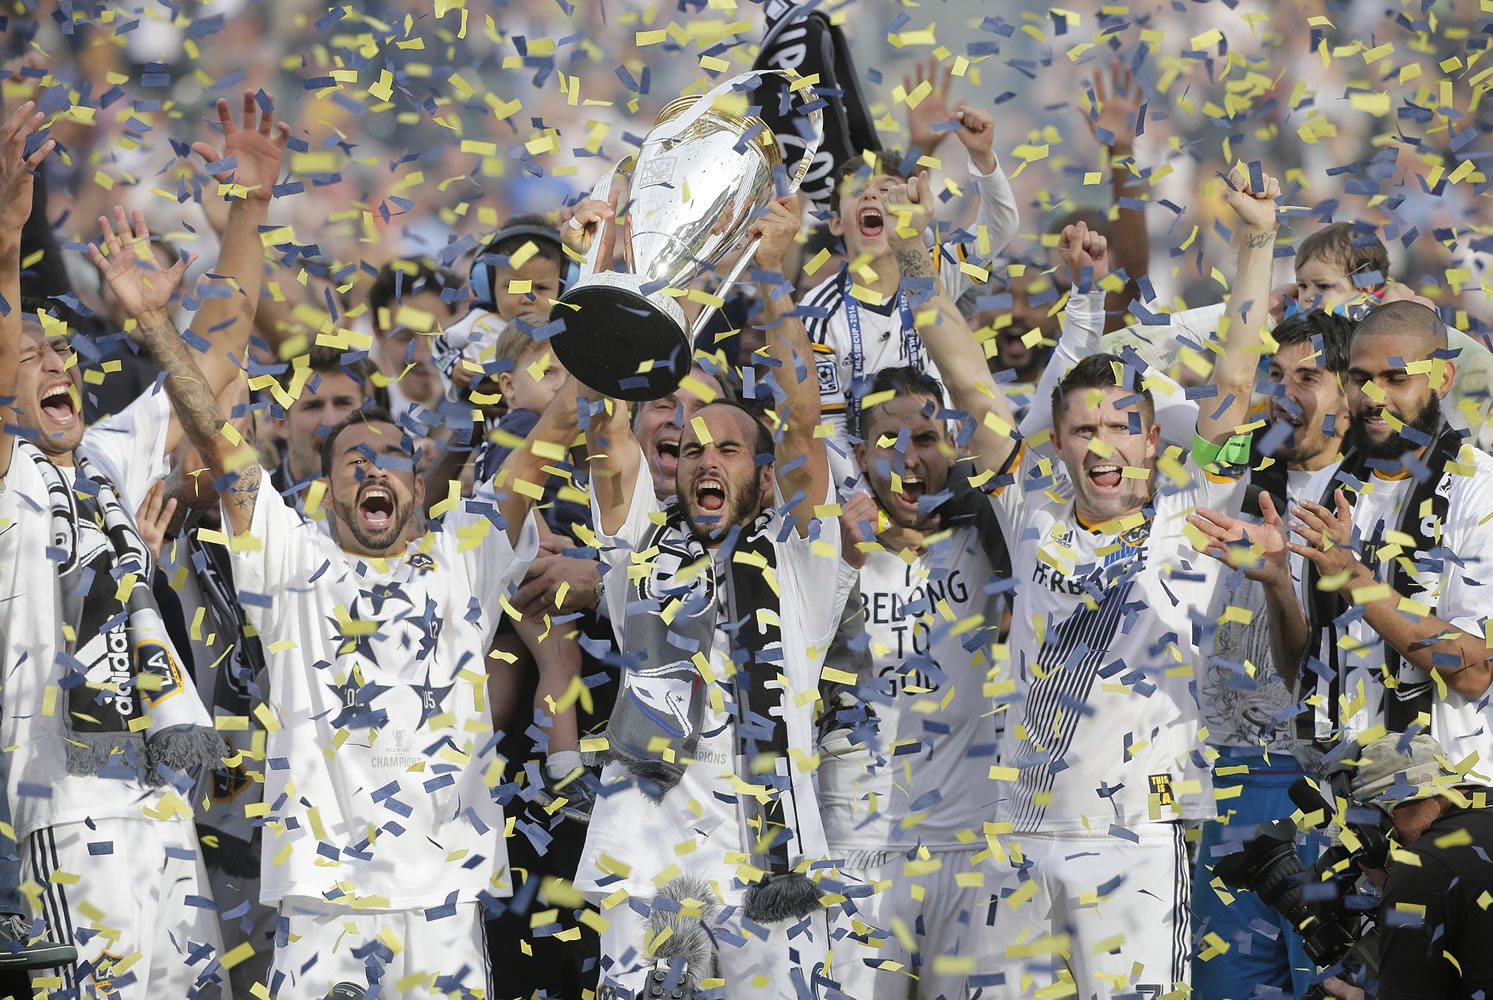 Los Angeles Galaxy's Landon Donovan, center, hoists the trophy as he and teammates celebrate after winning the MLS Cup championship against the New England Revolution on Sunday, Dec. 7, 2014, in Carson, Calif. (AP Photo/Jae C.